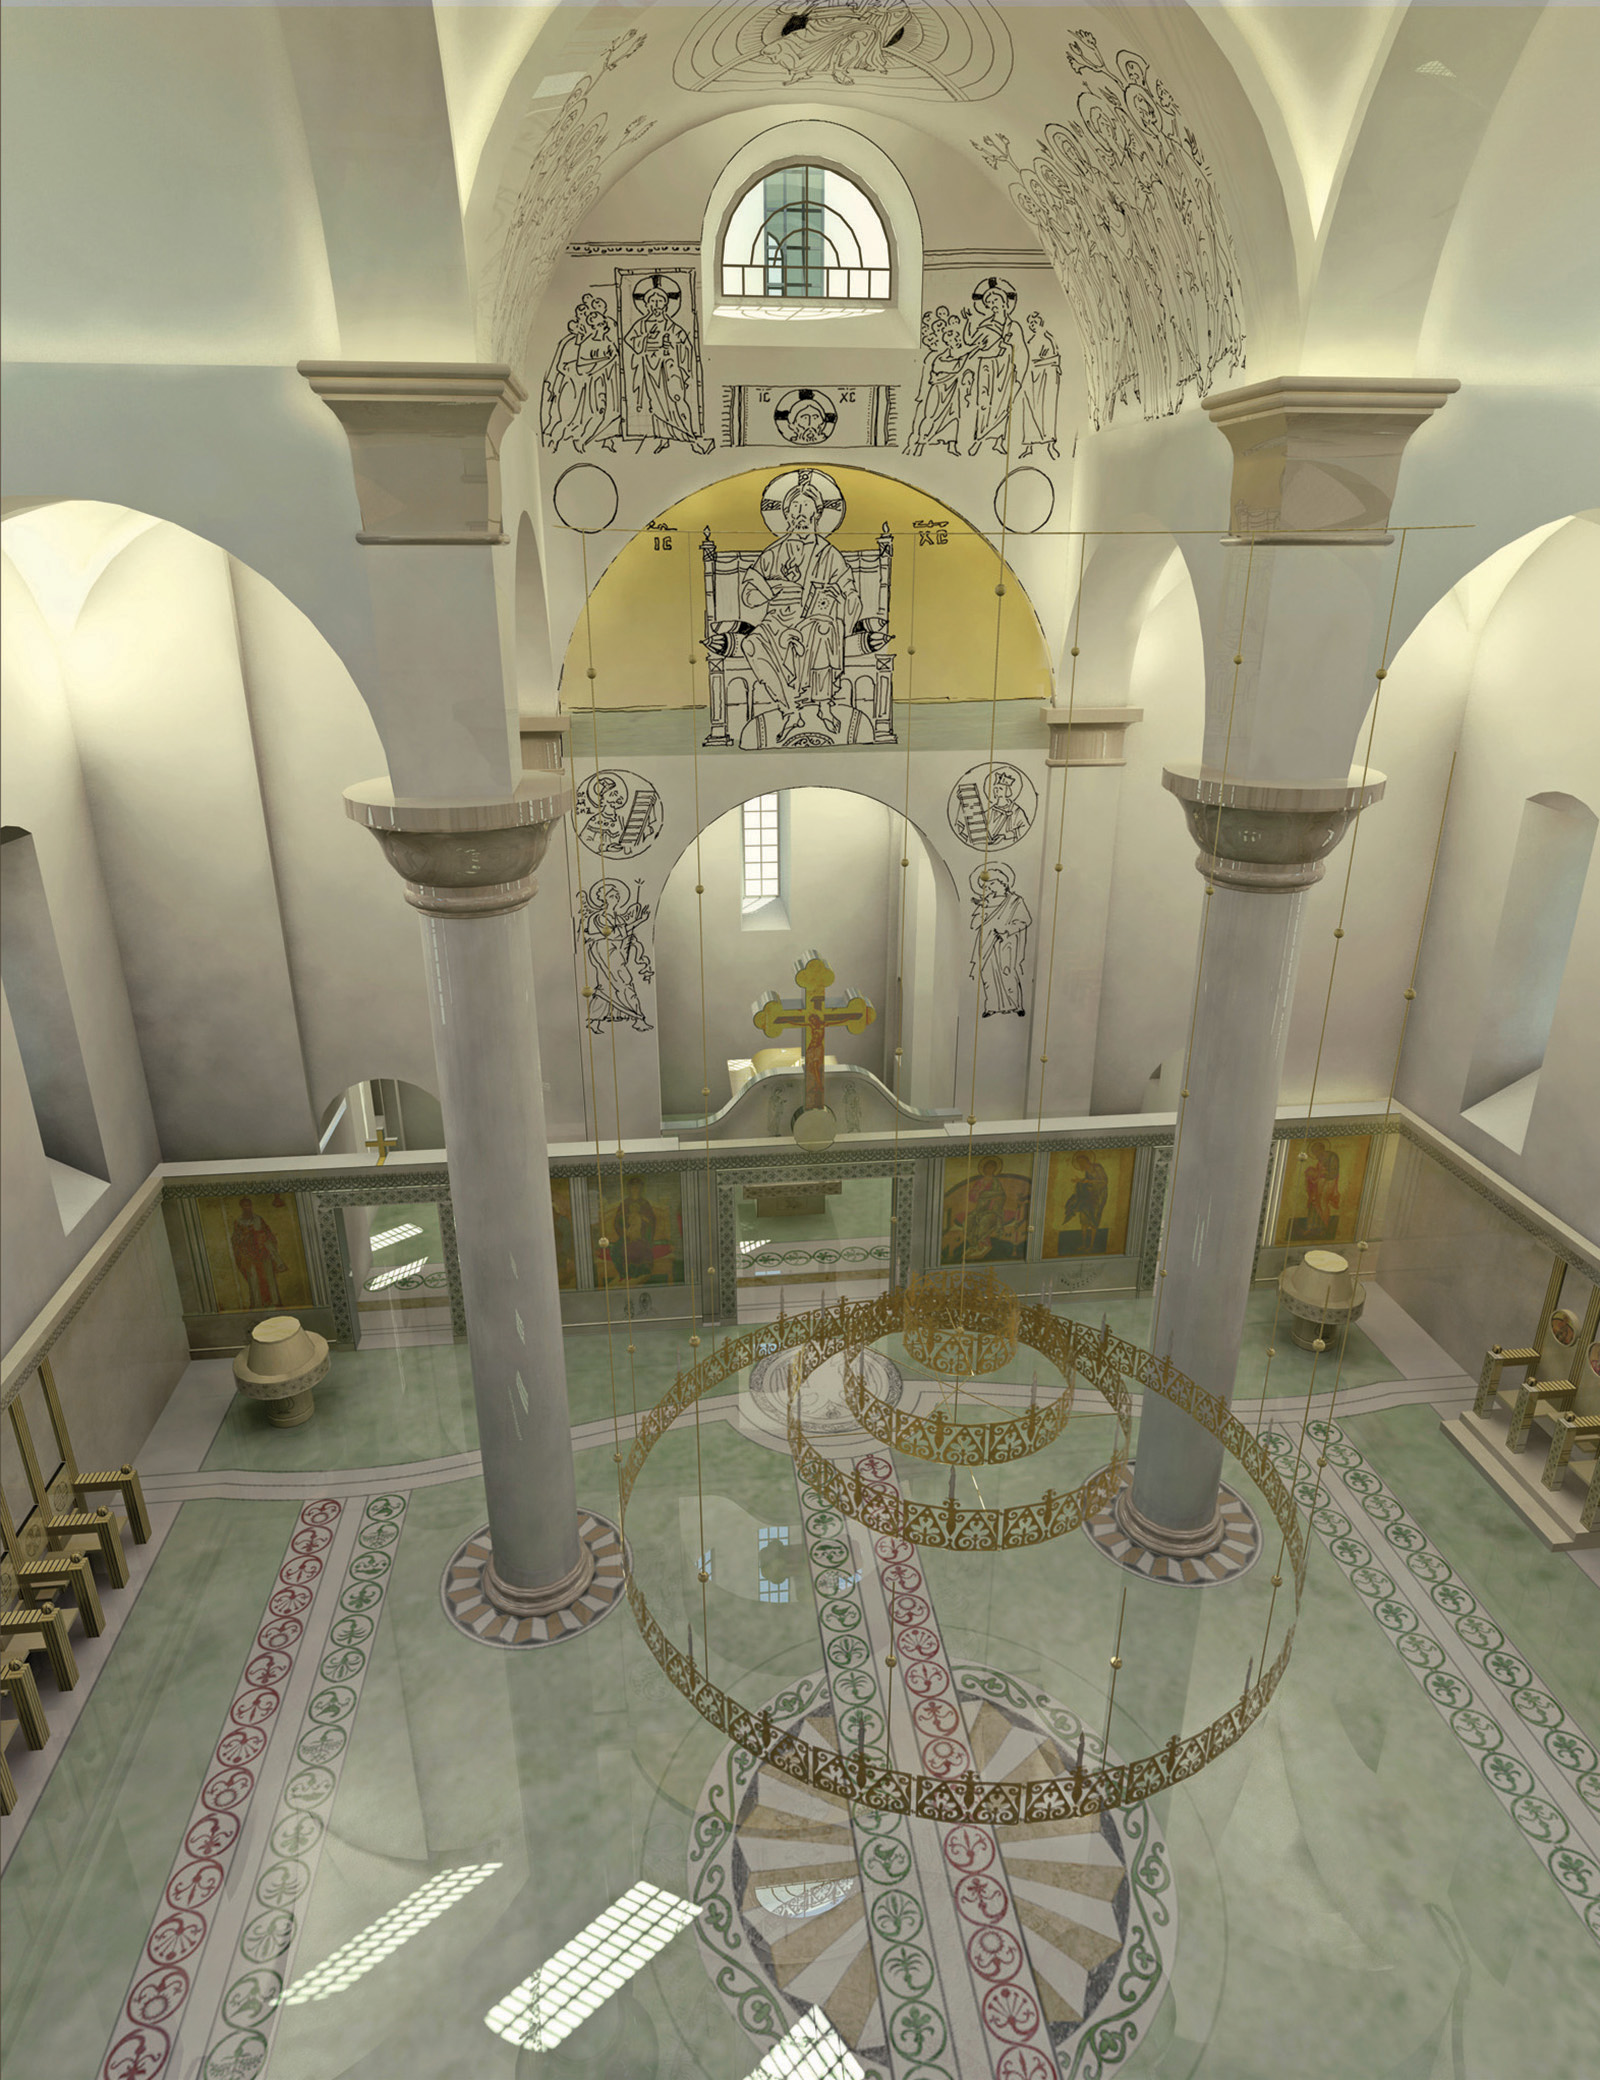 Contest for the interior of the Holy Trinity church 2nd prize